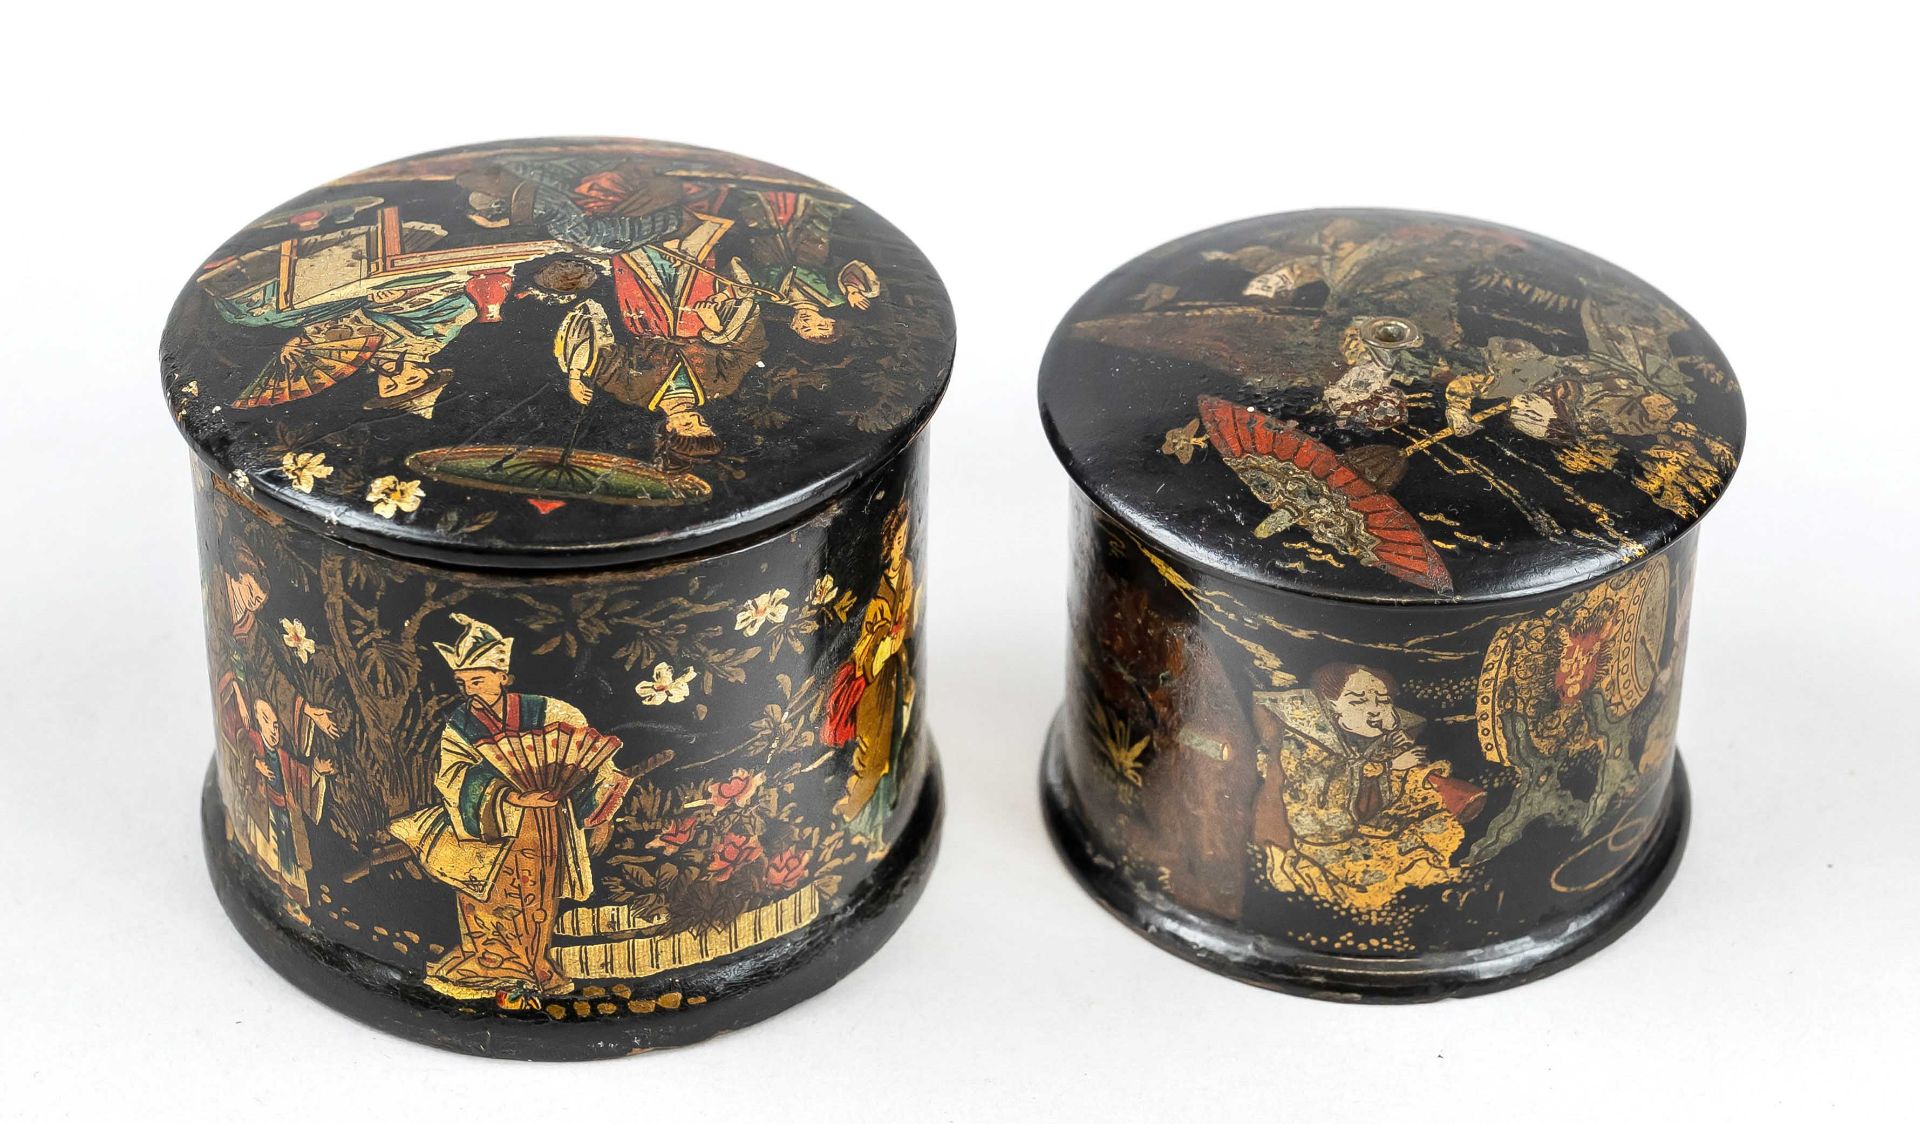 Pair of yarn boxes, Japan, Meiji period(1868-1912), round black lacquer lidded boxes with polychrome - Image 2 of 2